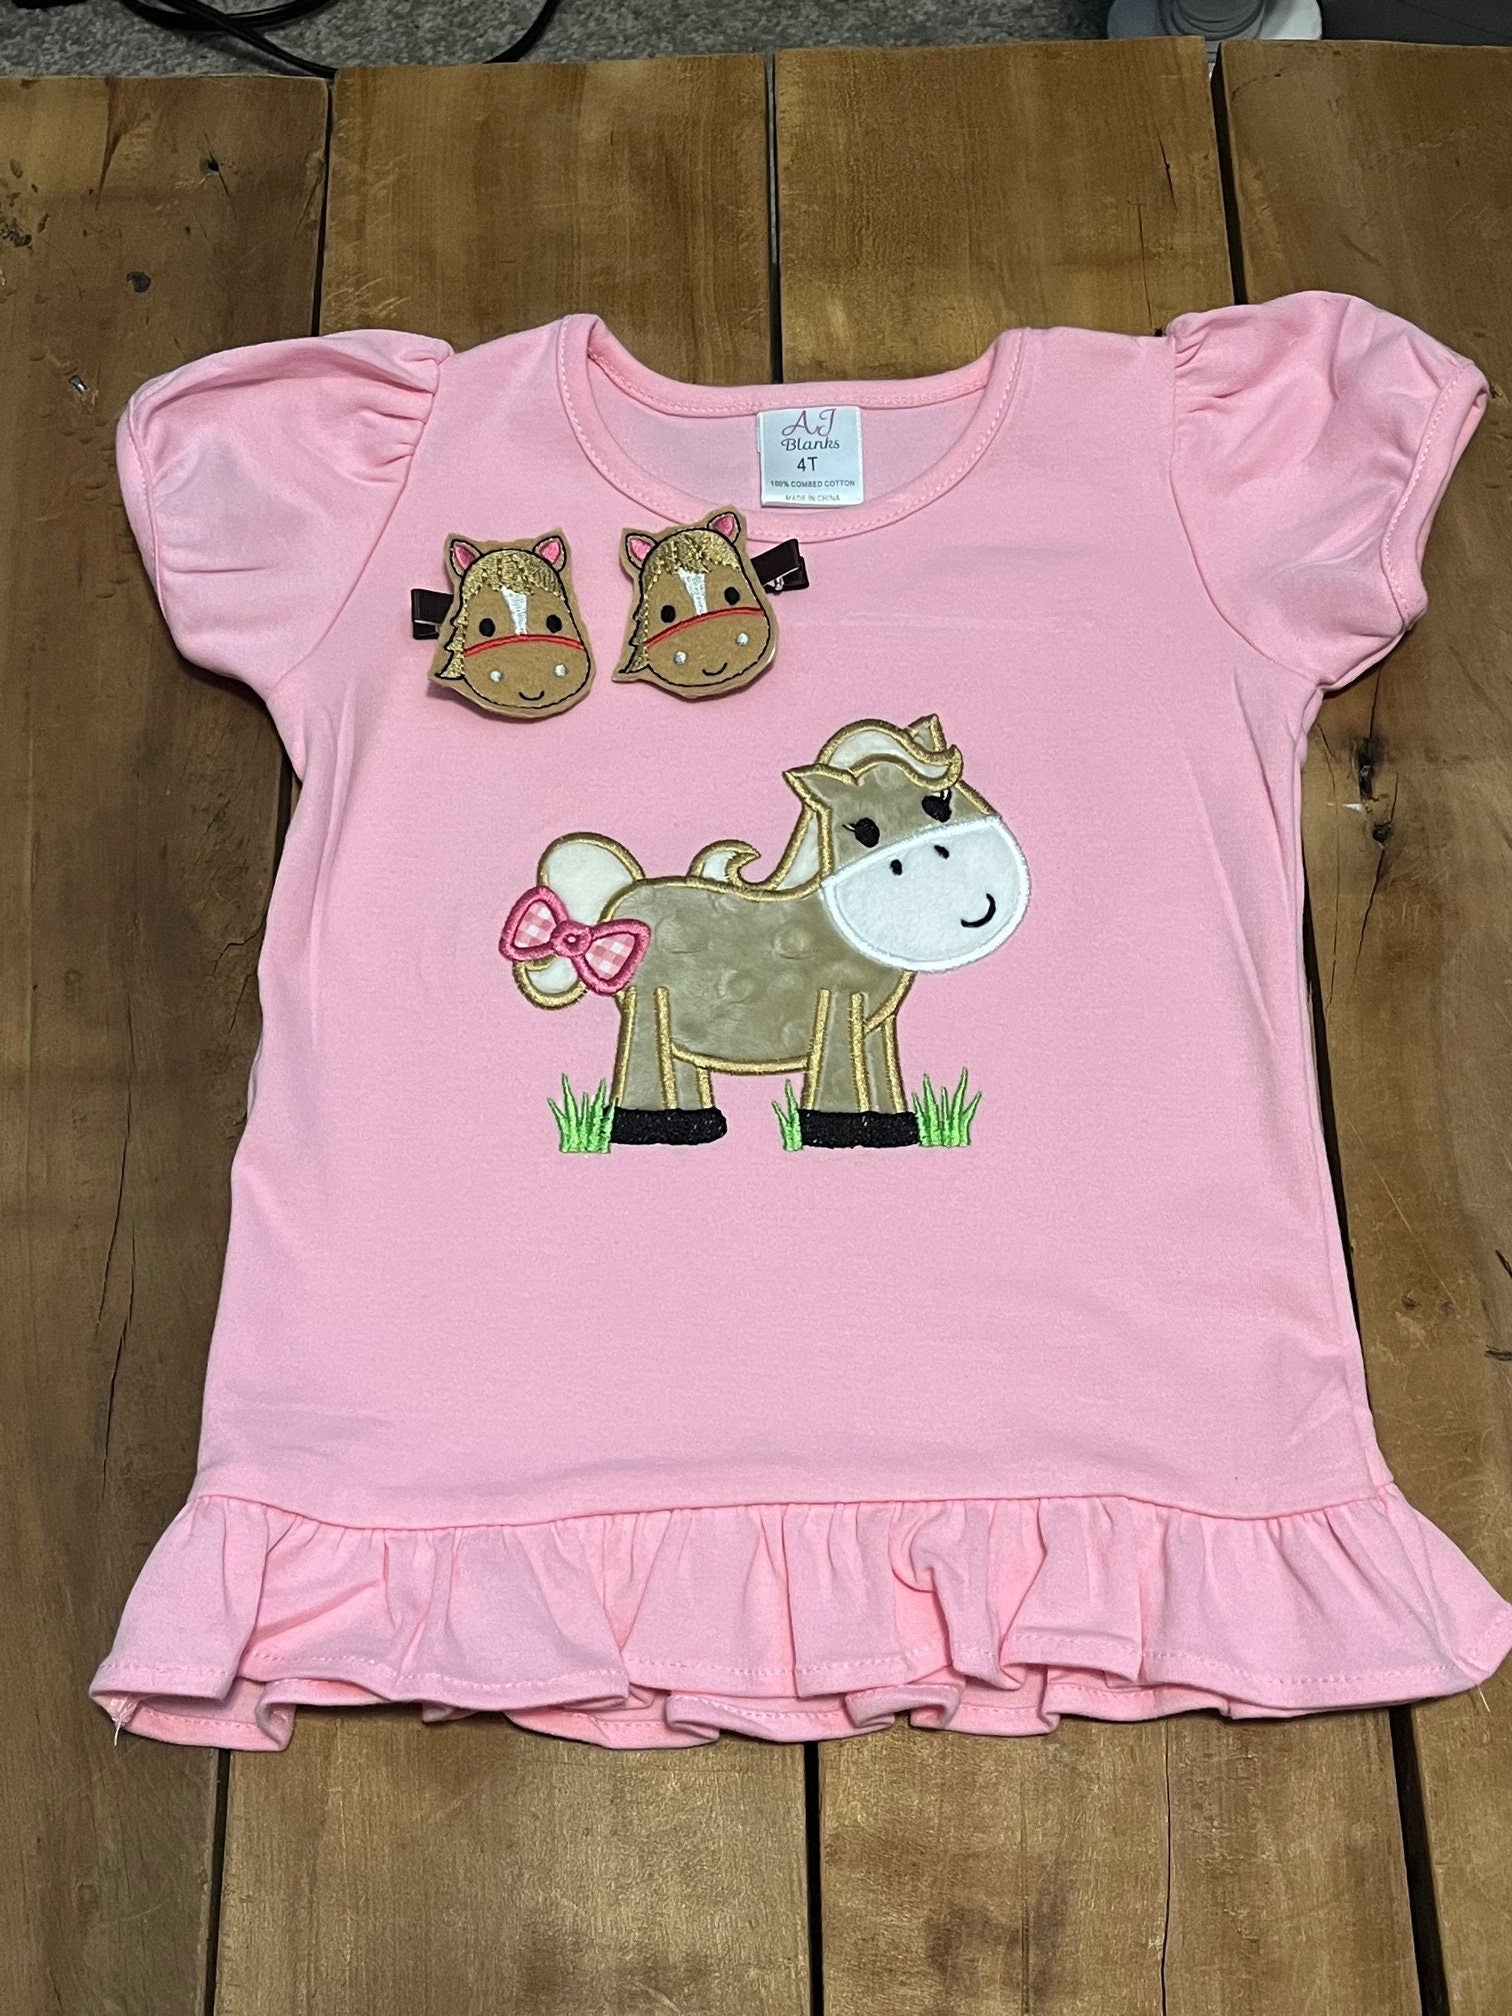 Embroidered horse shirt, shown in pink. Available in white and pink. Other colors available on request